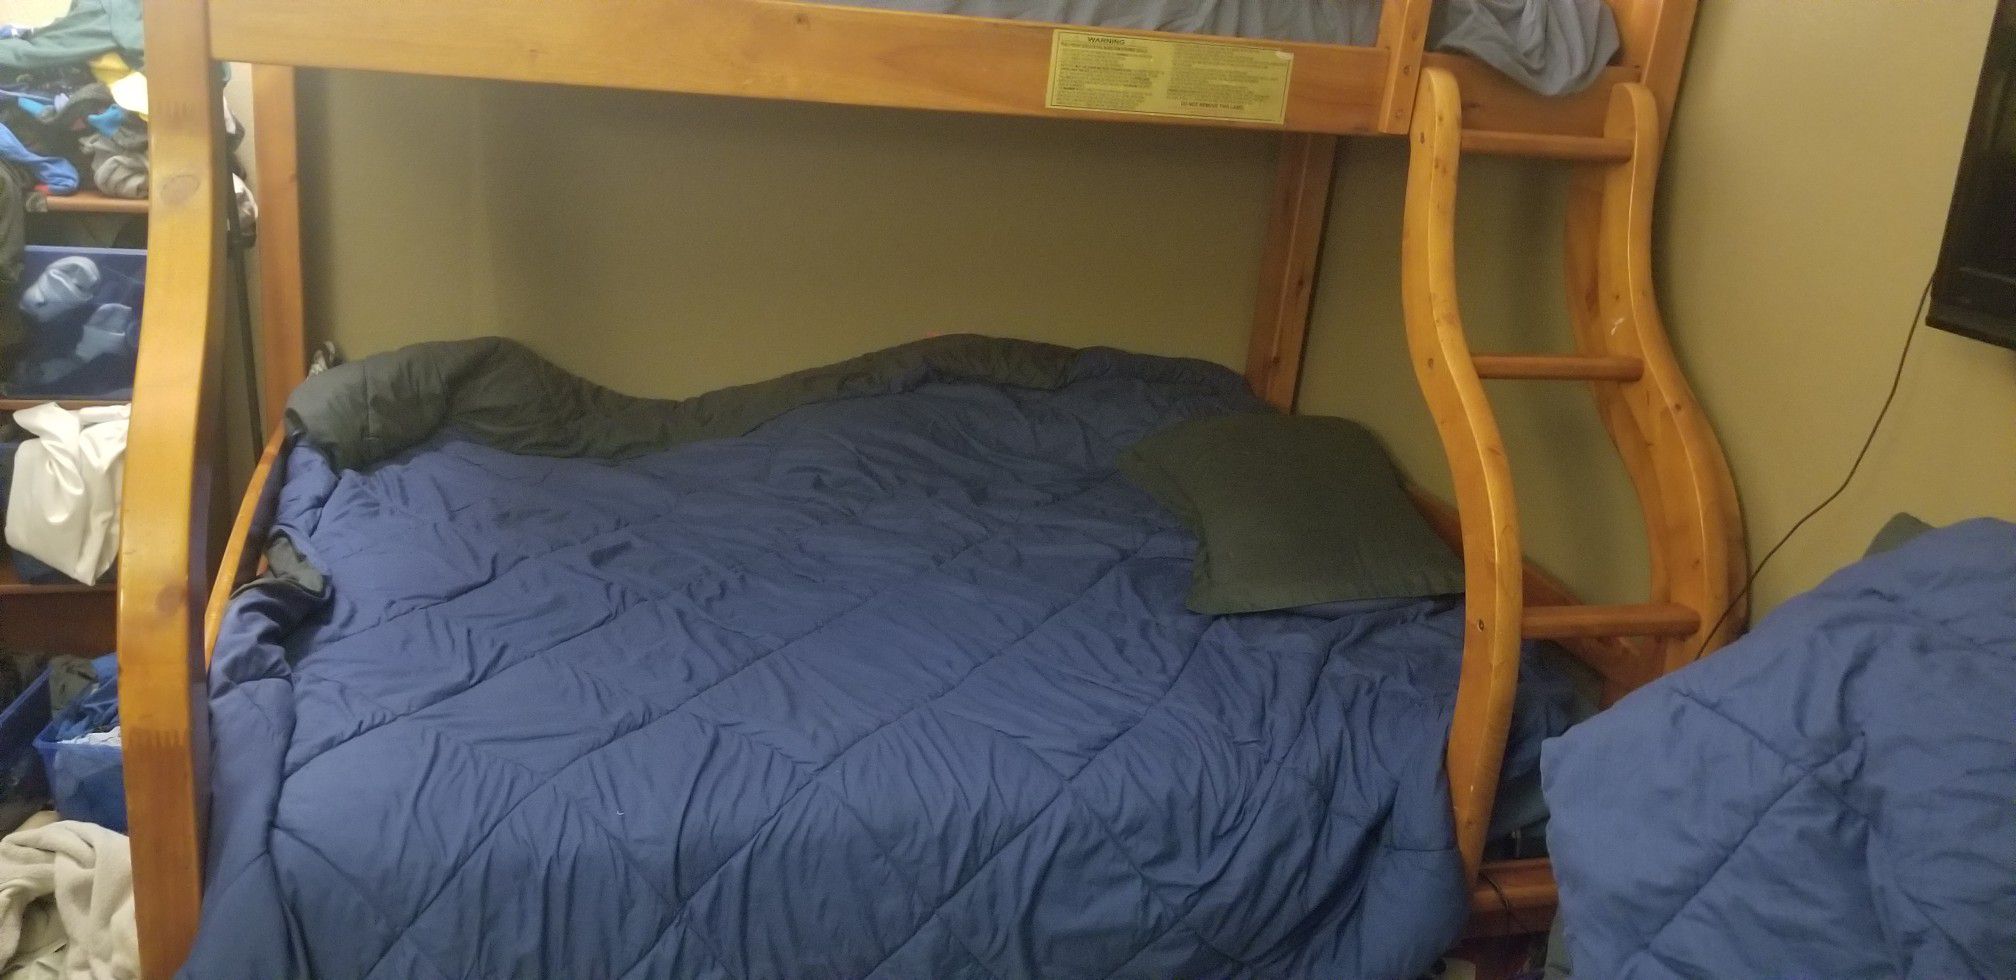 Bunk bed for sale(matress not included)